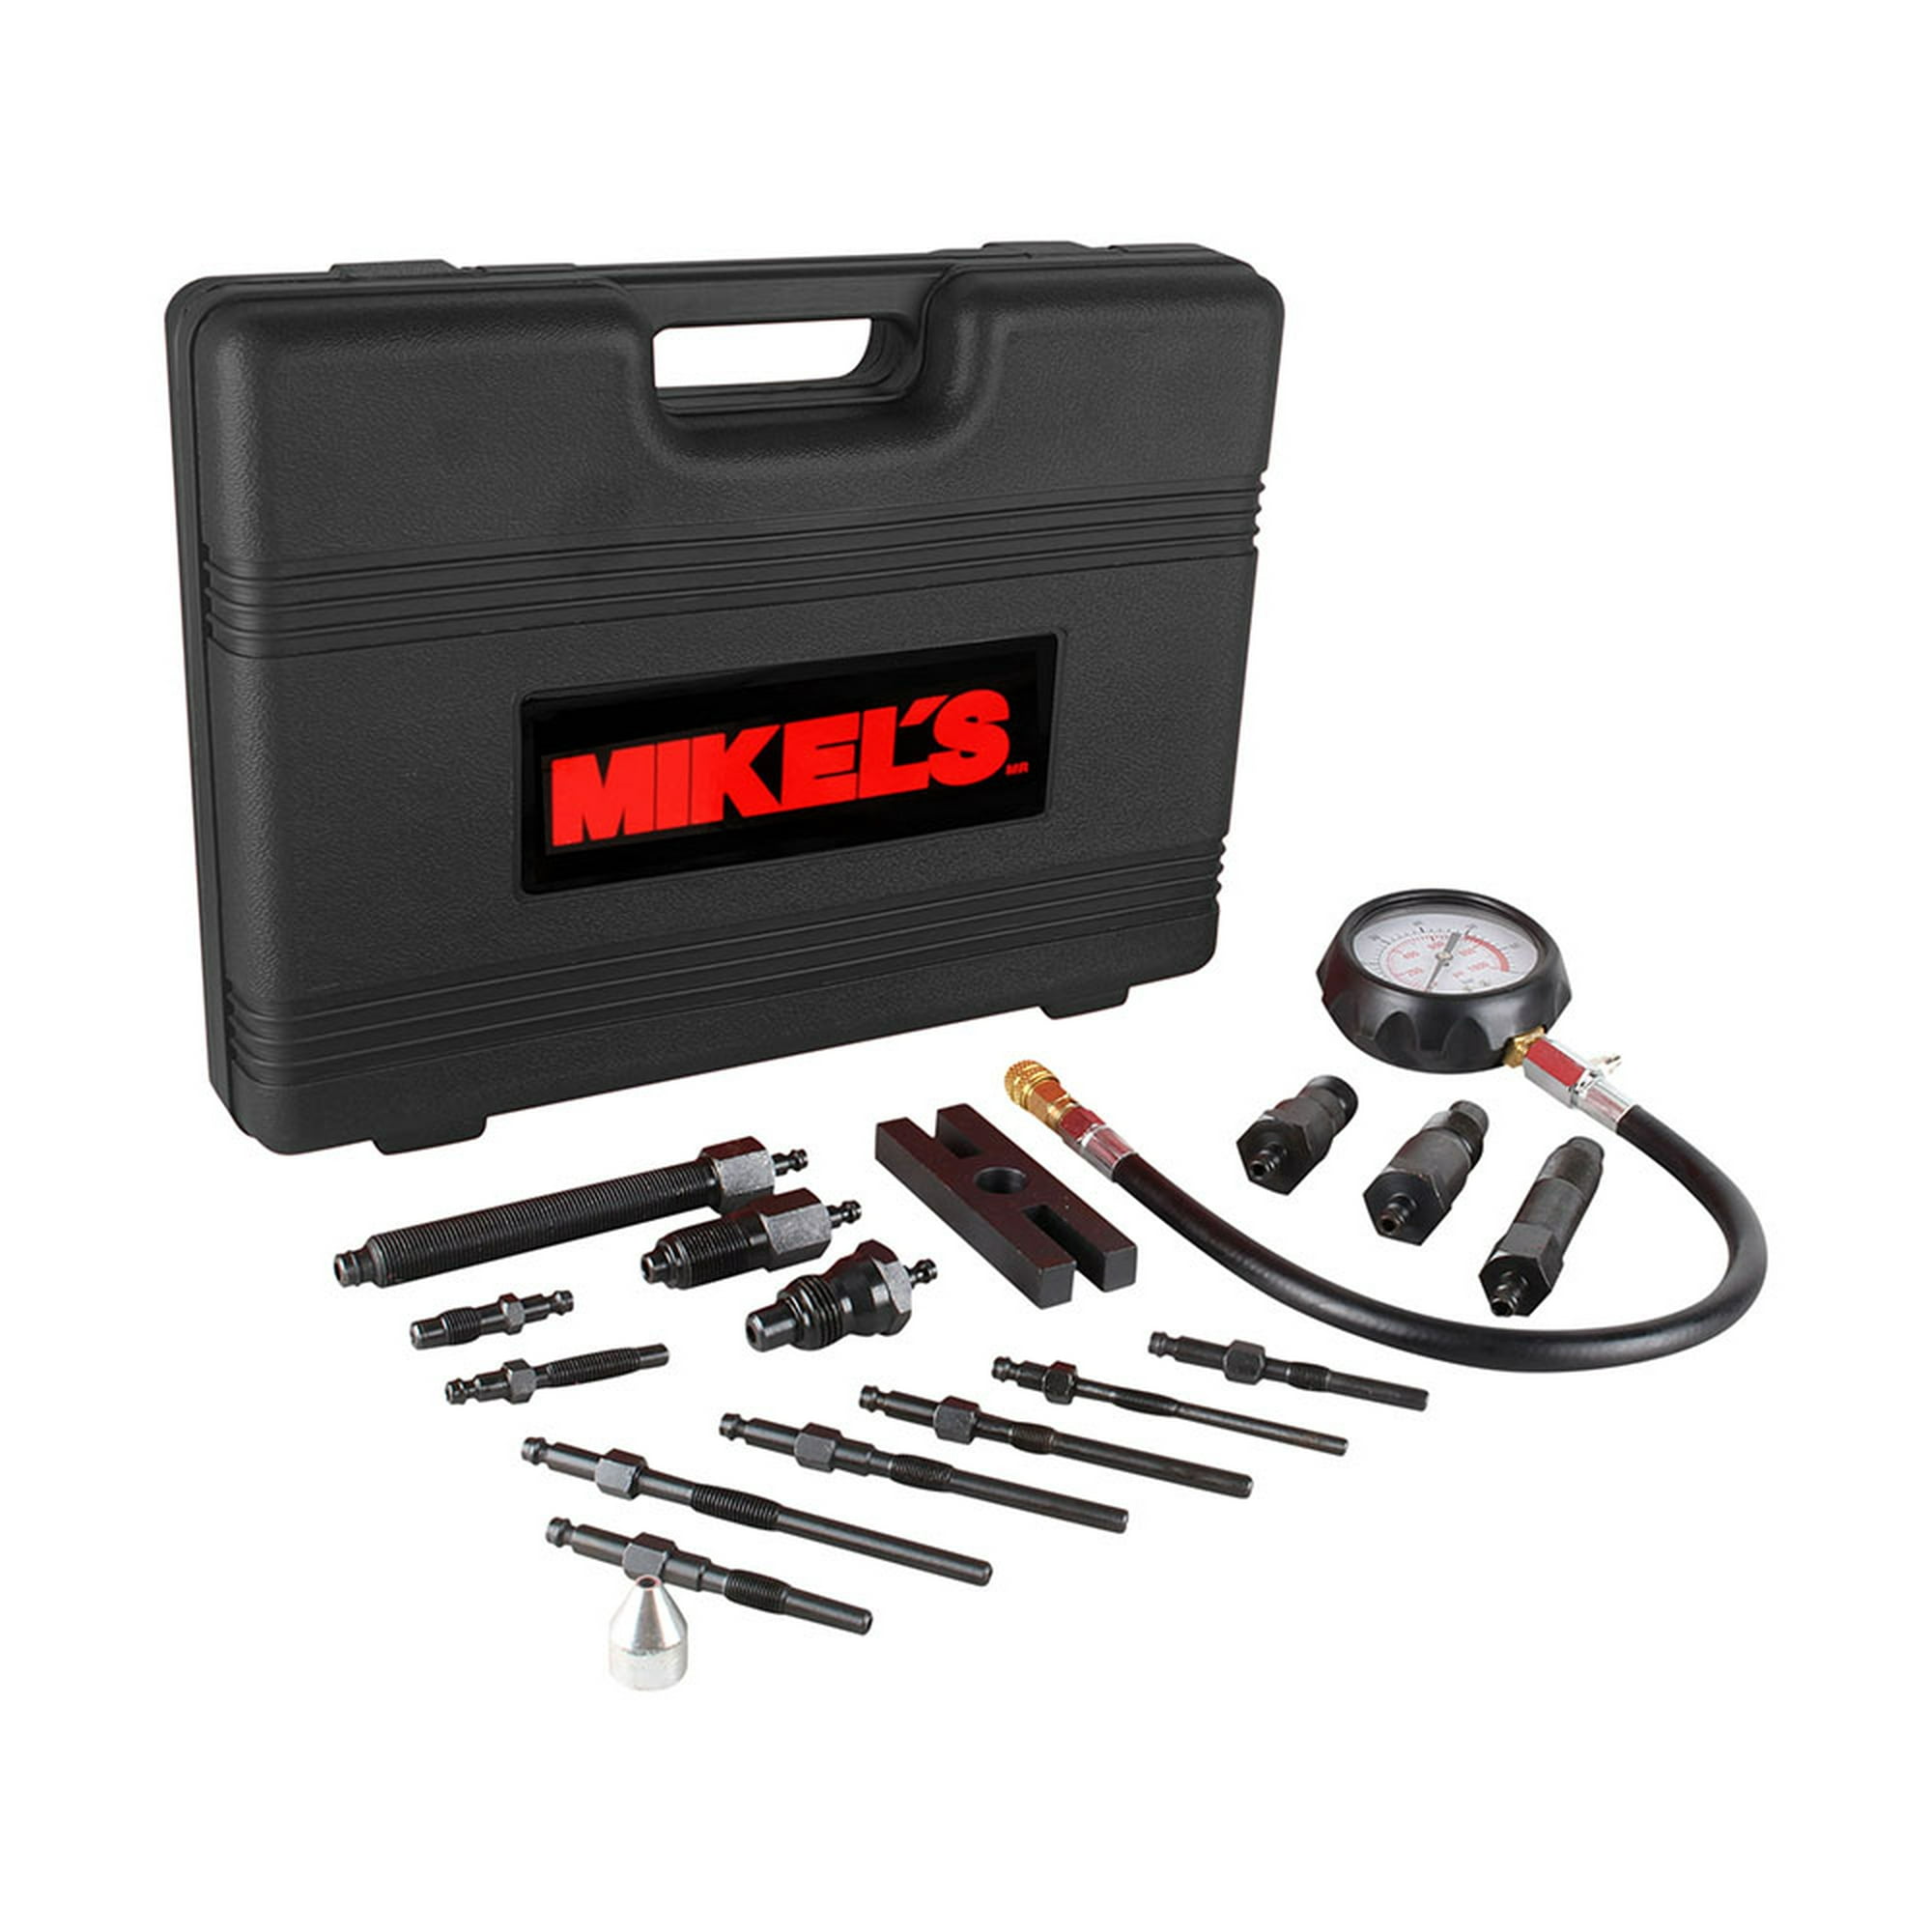 Kit compresometro diesel con accesorios mikels mikel's kcd